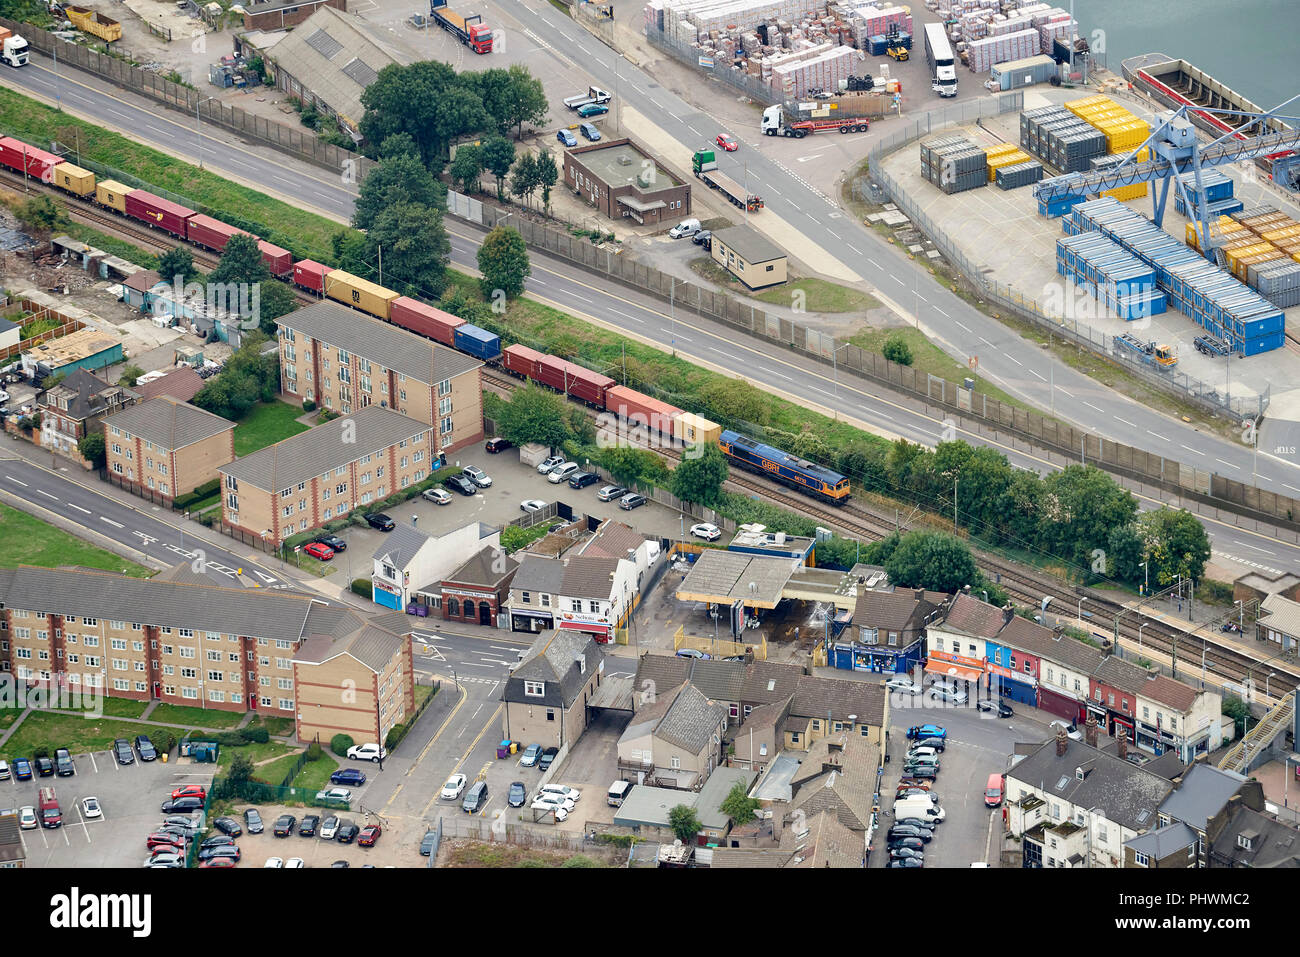 Aerial view of container freight train at Tilbury, South East England, UK Stock Photo